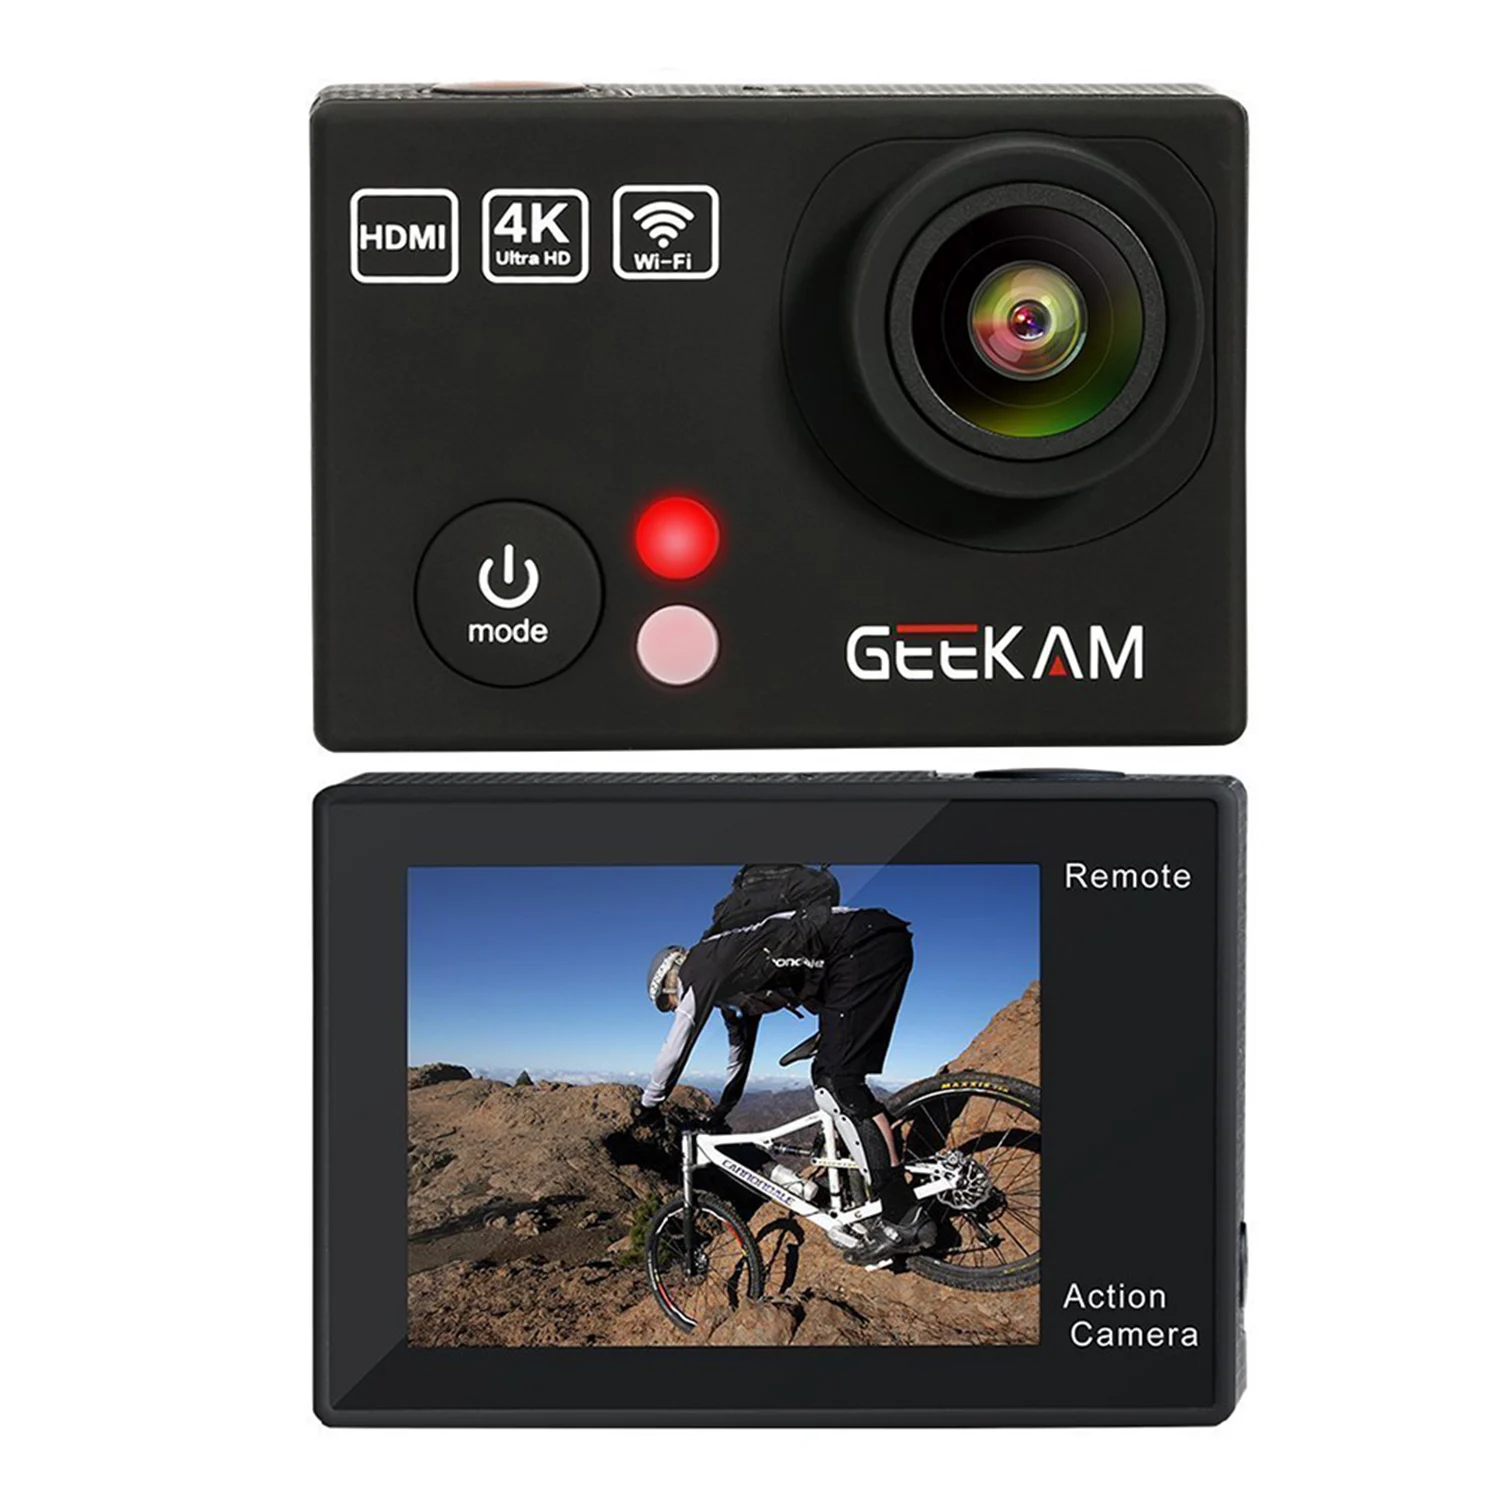 

Top Deals Geekam Action Camera 4K, Waterproof Action Camera cam with Wifi Remote Control 4K 25Fps 2.7K 12MP Ultra HD 170 Degree